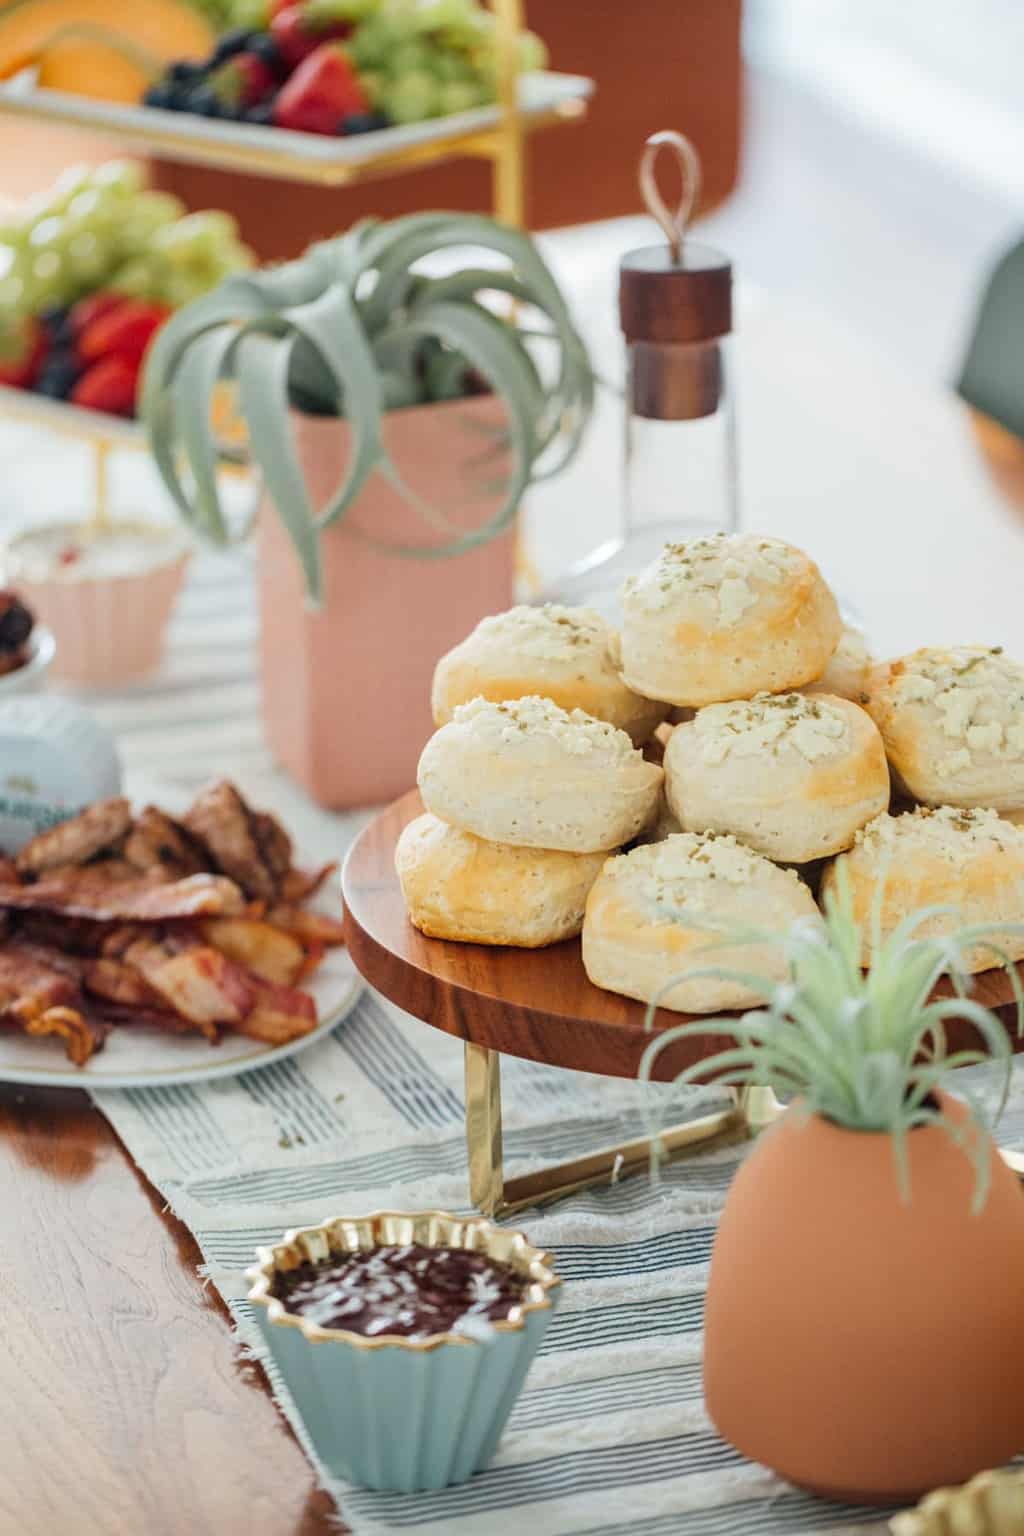 Real Entertaining: Easy Garlic & Herb Cheese Biscuits + Our Family Brunch!